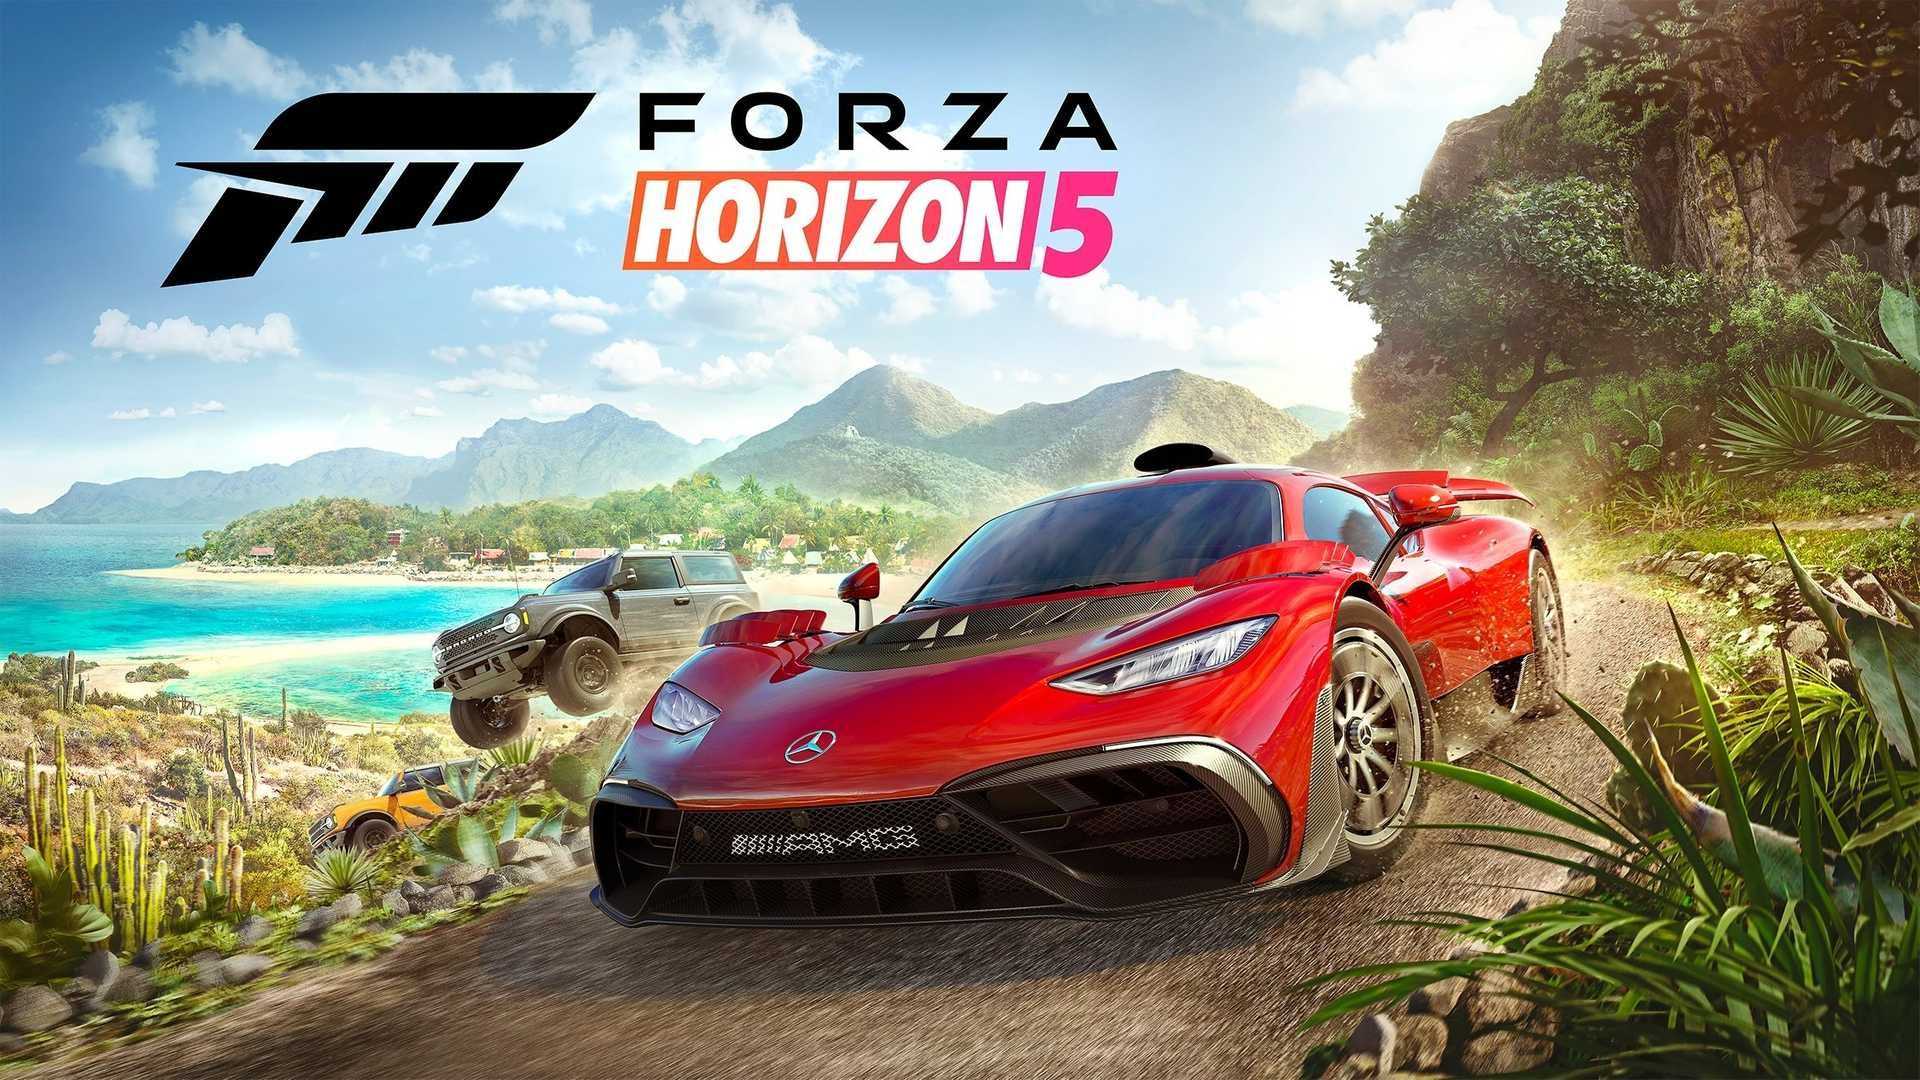 forza horizon 5 reached 6 million players in launch week